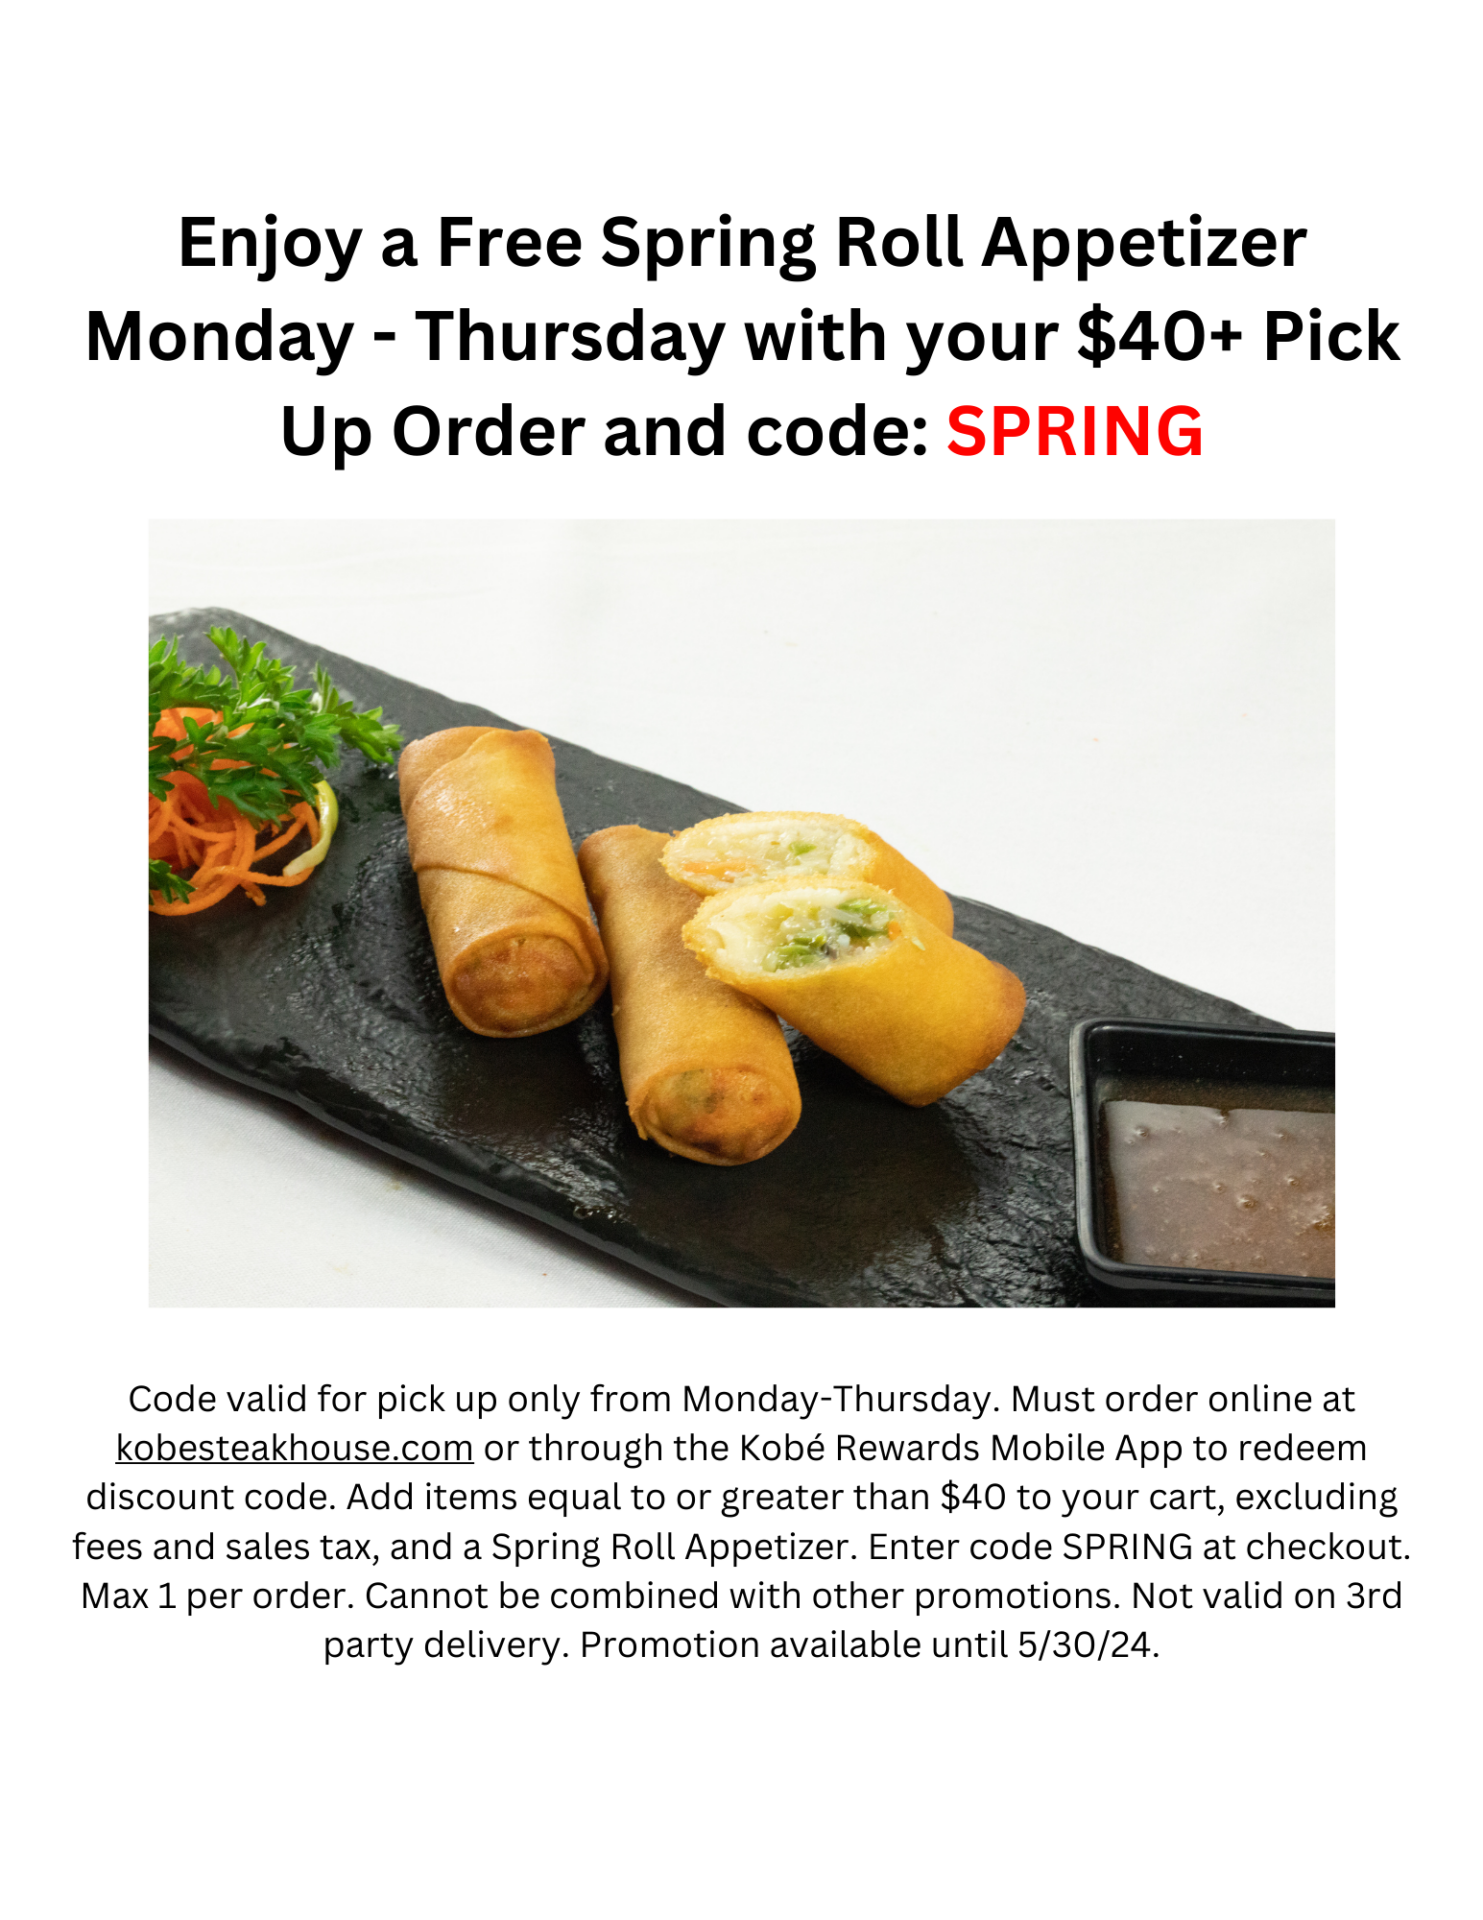 Enjoy a Free Spring Roll Appetizer Monday - Thursday with your $40+ Pick Up Order and code: SPRING. Code valid for pick up only from Monday-Thursday. Must order online at kobesteakhouse.com or through the Kobé Rewards Mobile App to redeem discount code. Add items equal to or greater than $40 to your cart, excluding fees and sales tax, and a Spring Roll Appetizer. Enter code SPRING at checkout. Max 1 per order. Cannot be combined with other promotions. Not valid on 3rd party delivery. Promotion available until 5/30/24.